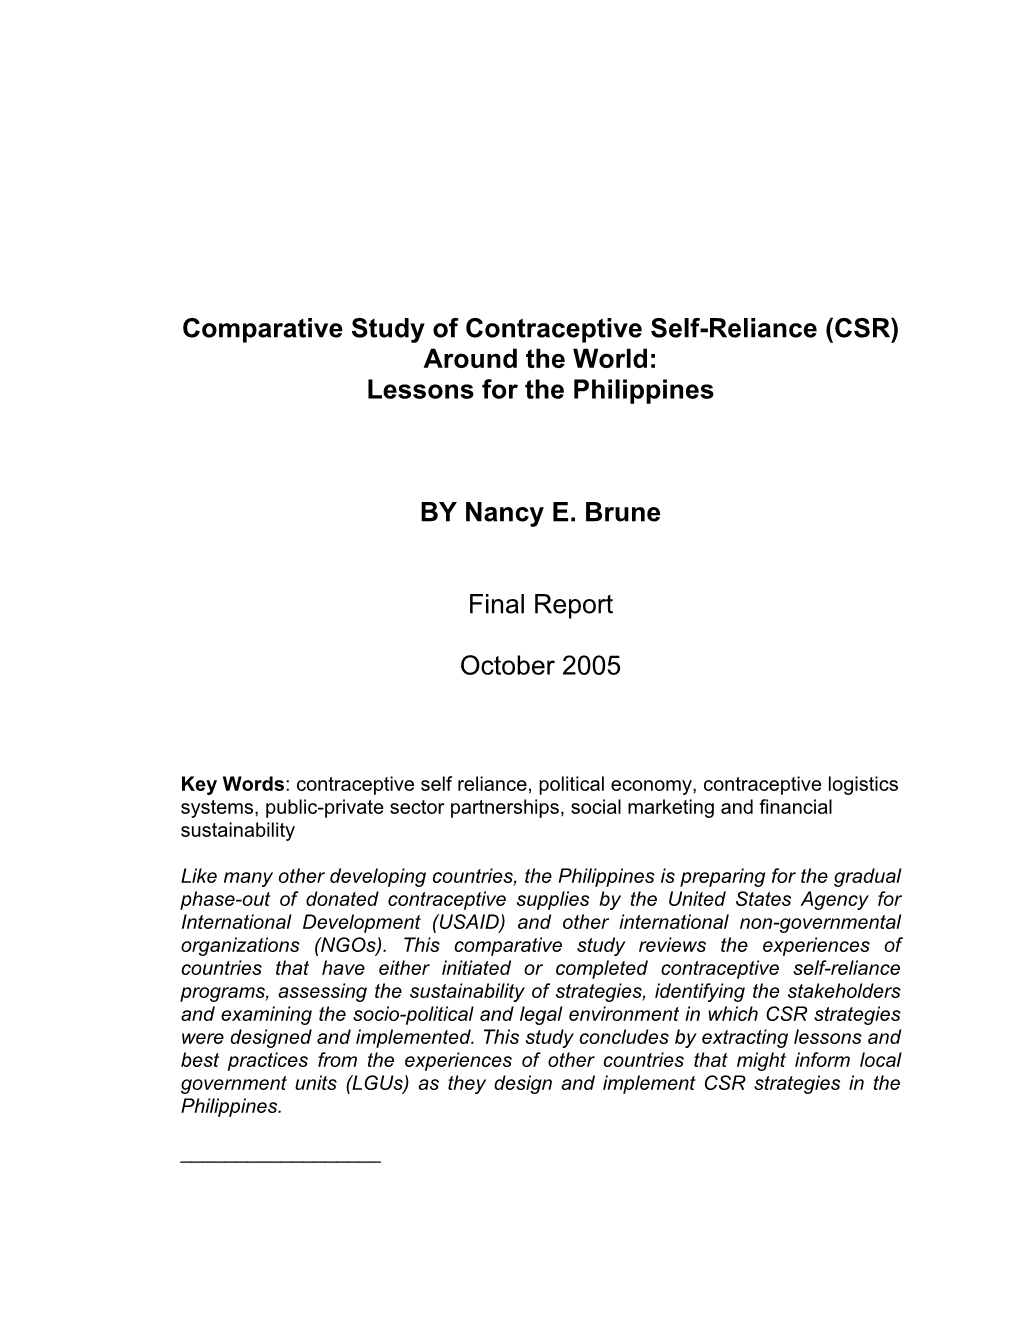 Comparative Study of Contraceptive Self-Reliance (CSR) Around the World: Lessons for the Philippines